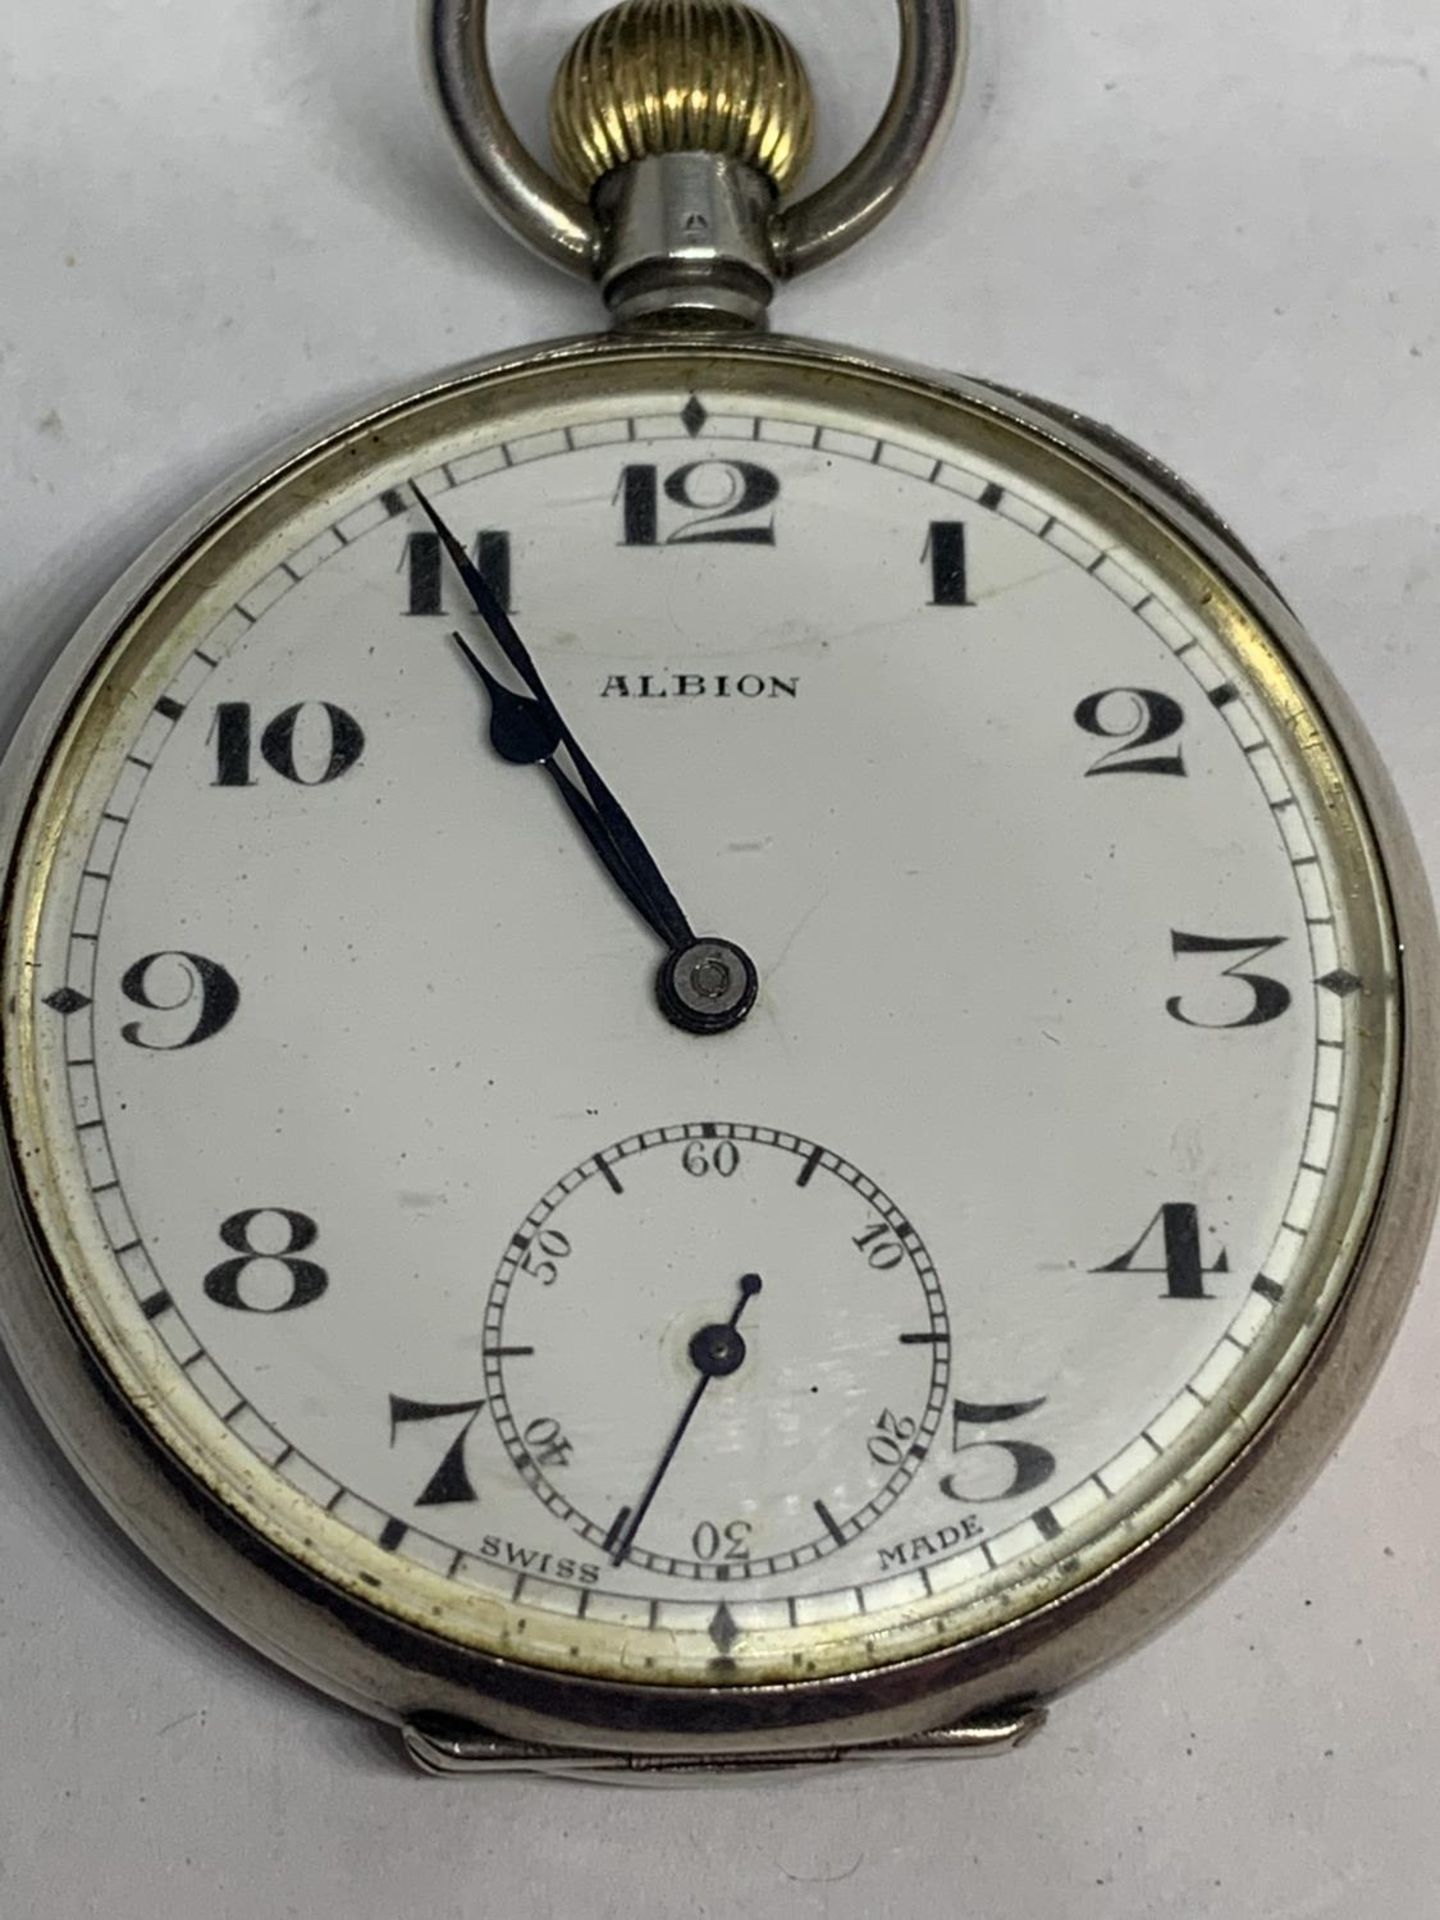 A MAKED 925 SILVER ALBION POCKET WATCH - Image 2 of 4